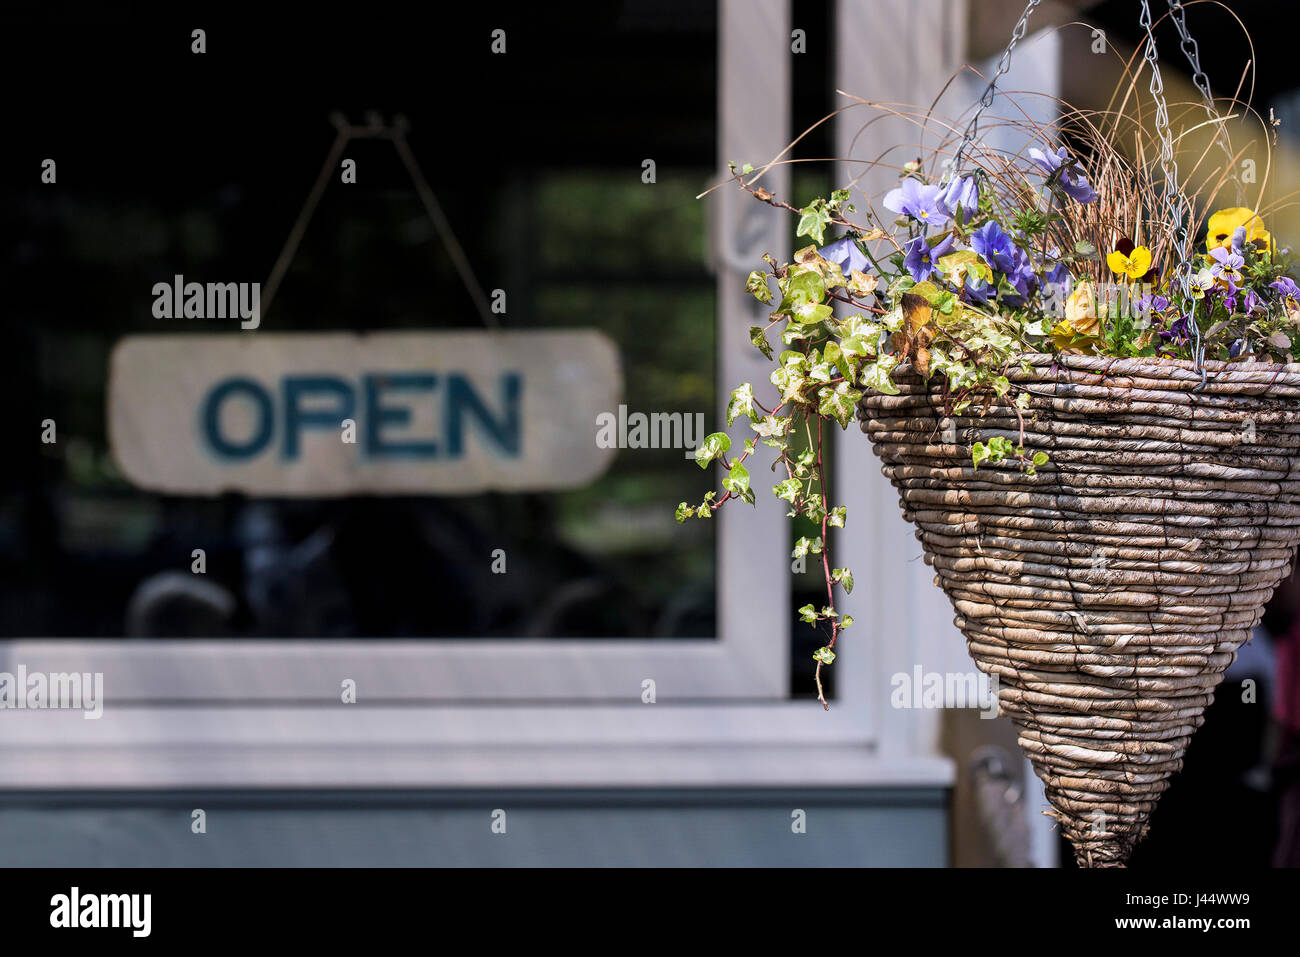 A hanging basket with colourful flowers Restaurant Cafe Open sign Decoration Stock Photo